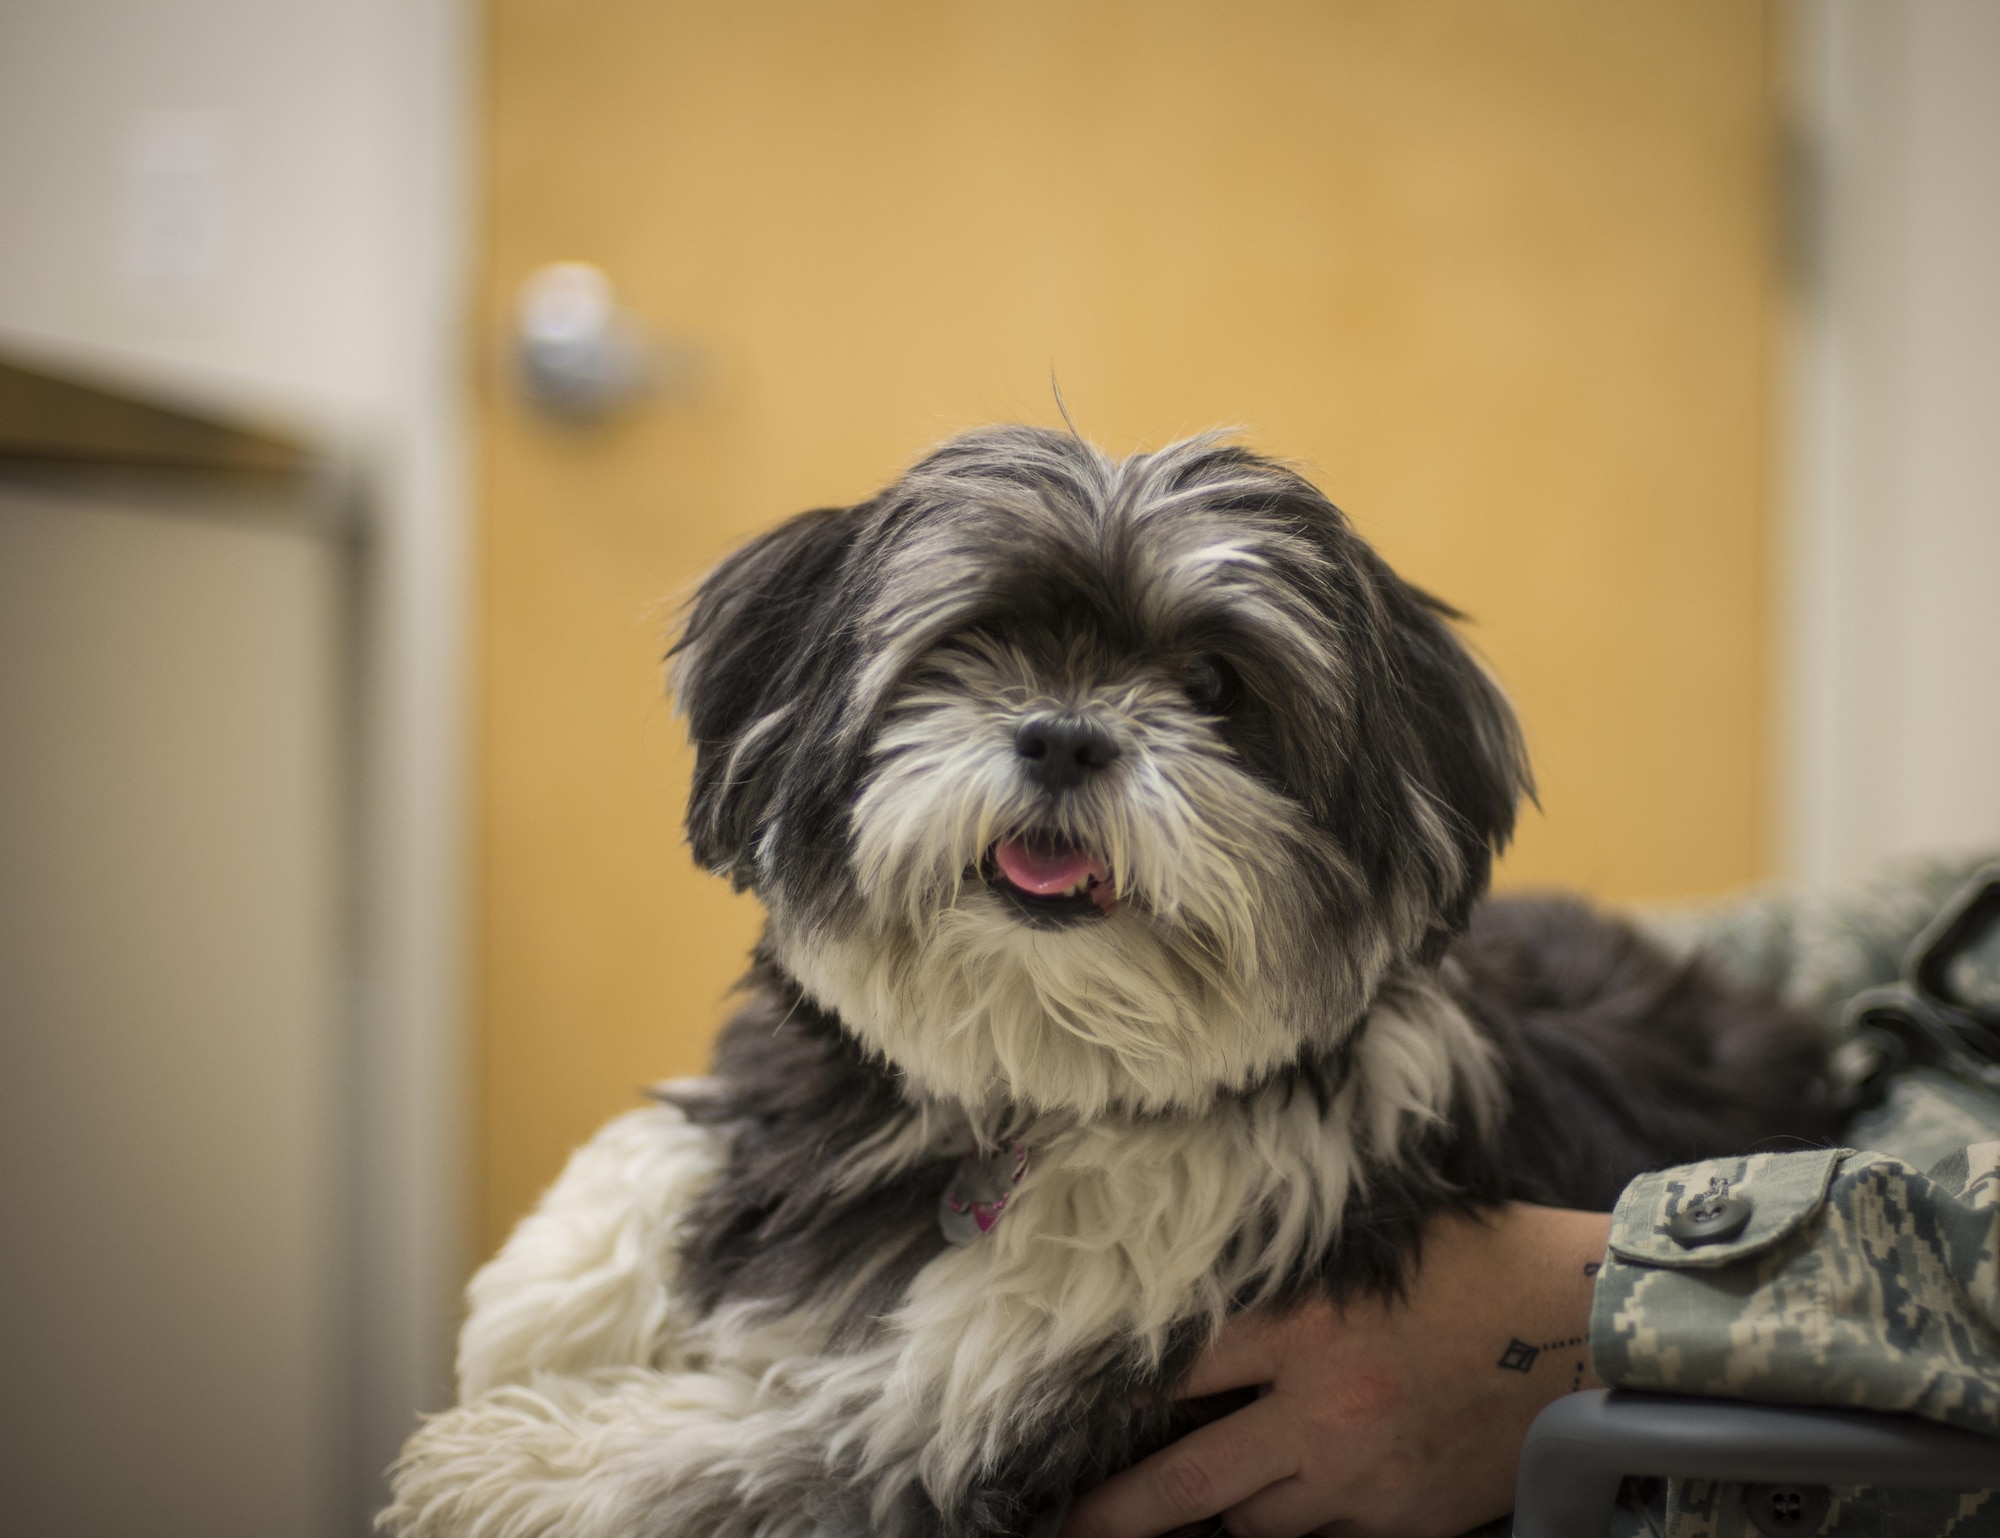 Maggie, a 9-year-old Lhasa Apso, poses for the camera during a checkup at the 49th Medical Group veterinary clinic at Holloman Air Force Base, N.M. on April 27, 2017. To better prepare dog owners for the upcoming summer season, Dr. Carolyn Fletcher, a veterinarian with the 49th MDG veterinary clinic, provided some tips on summer pet safety, with topics ranging from heat exhaustion to traveling. (U.S. Air Force photo by Airman 1st Class Alexis P. Docherty) 